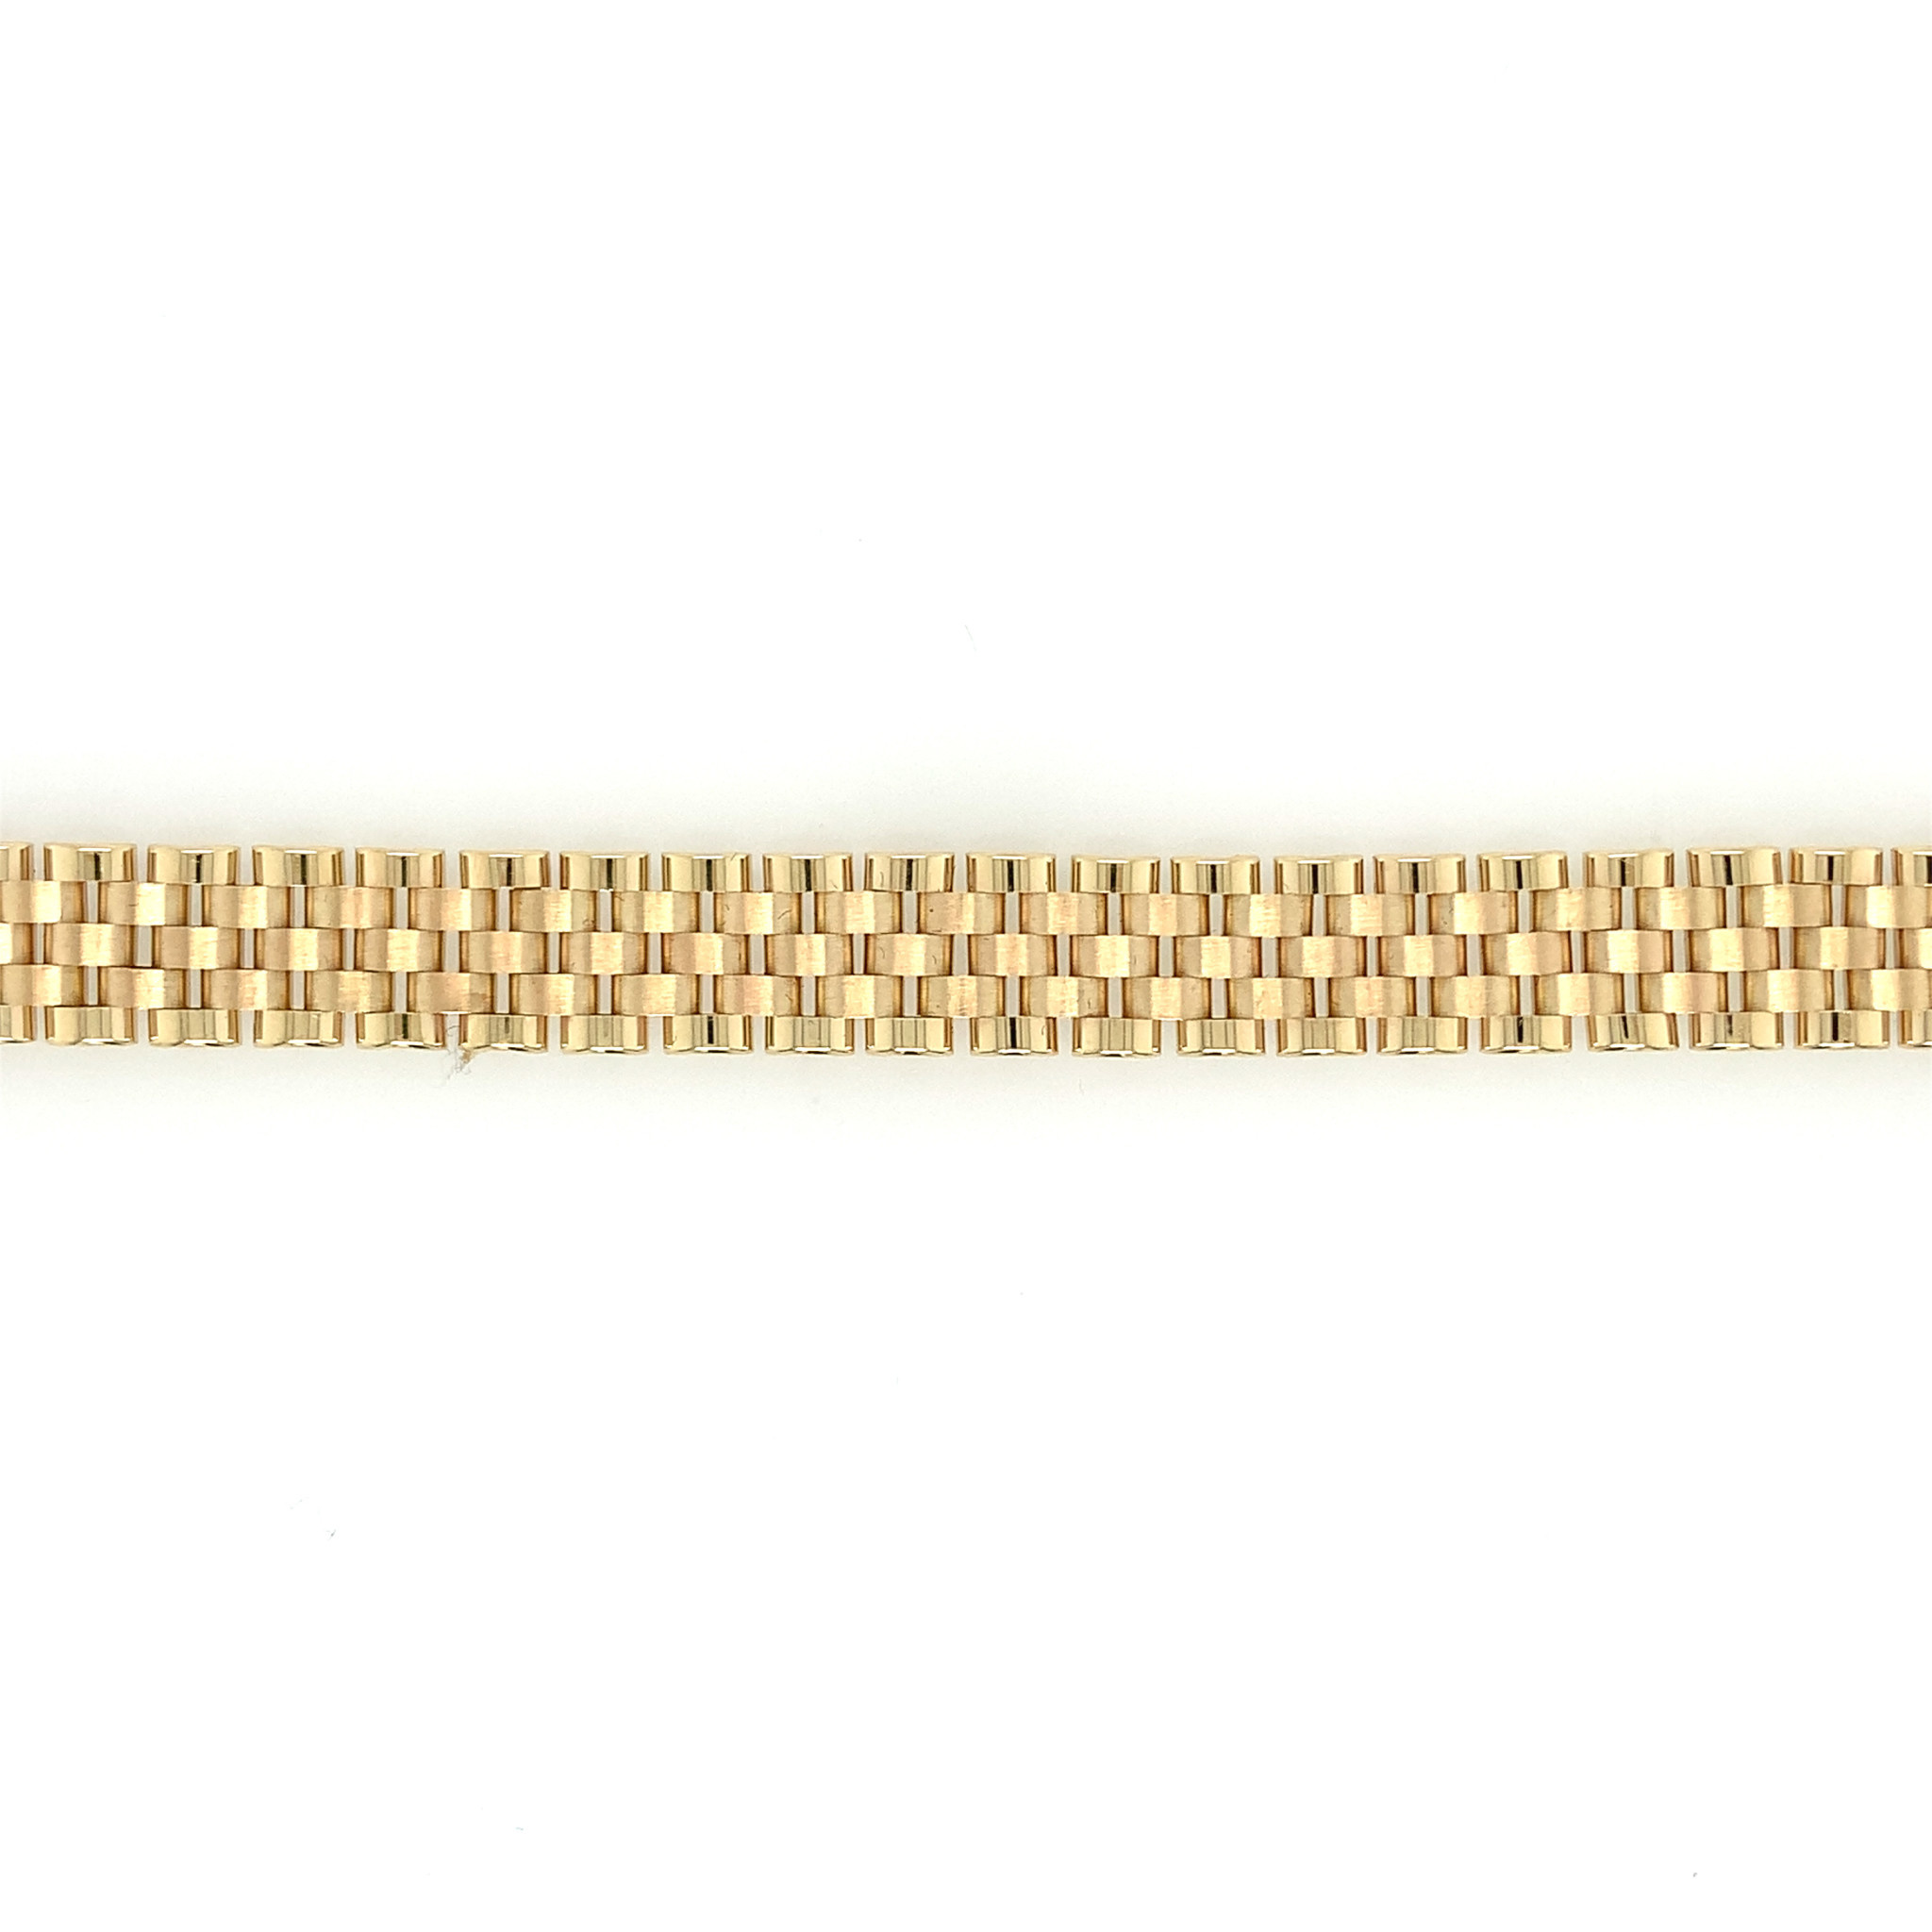 14k Yellow Gold Rolex Watch Band Bracelet 65112: buy online in NYC. Best  price at TRAXNYC.